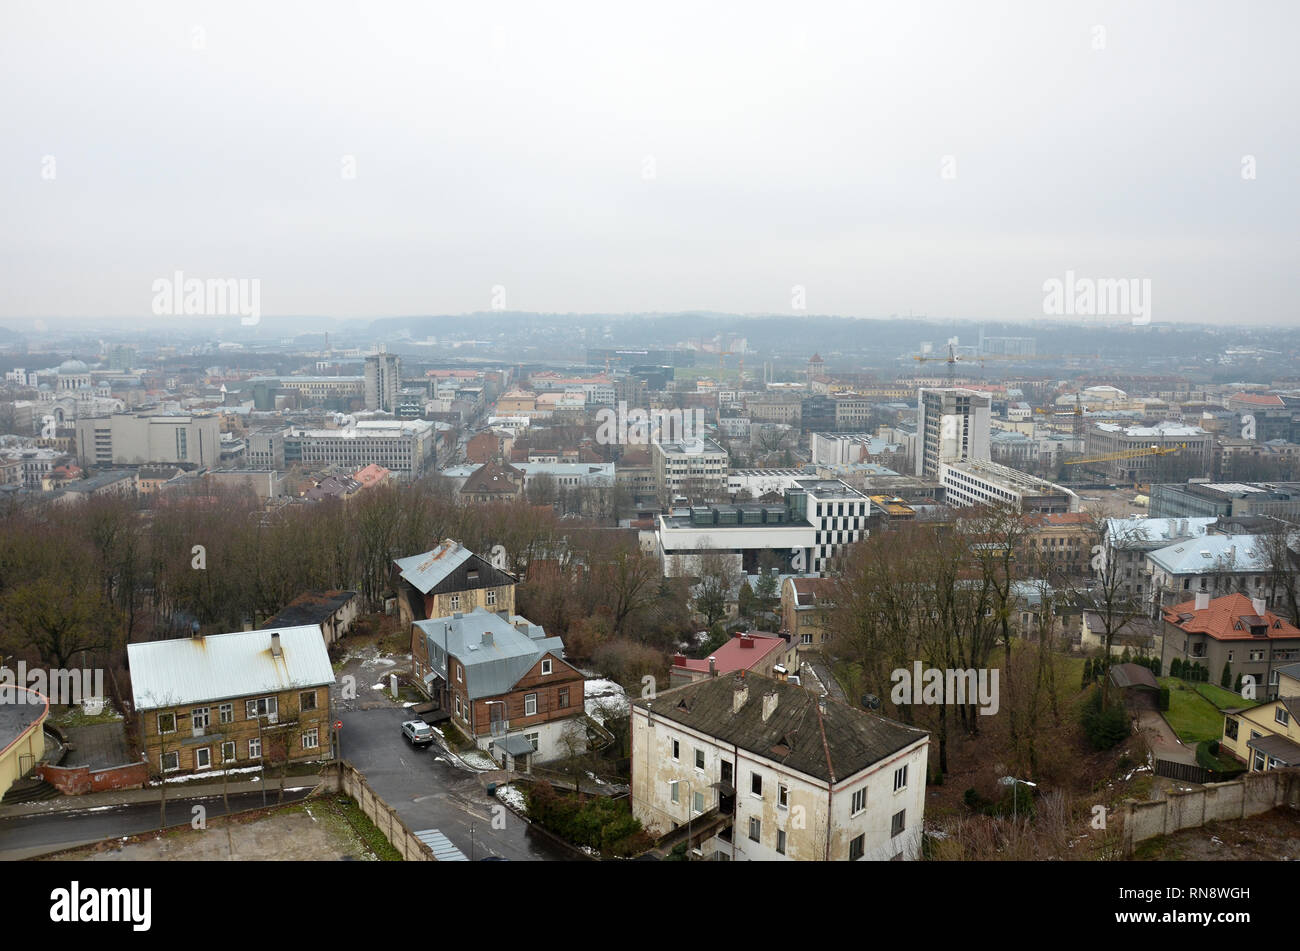 View of Kaunas from the roof of Christ's Resurrection Church (completed in 2005), Žaliakalnis, Kaunas, Lithuania, December 2018 Stock Photo